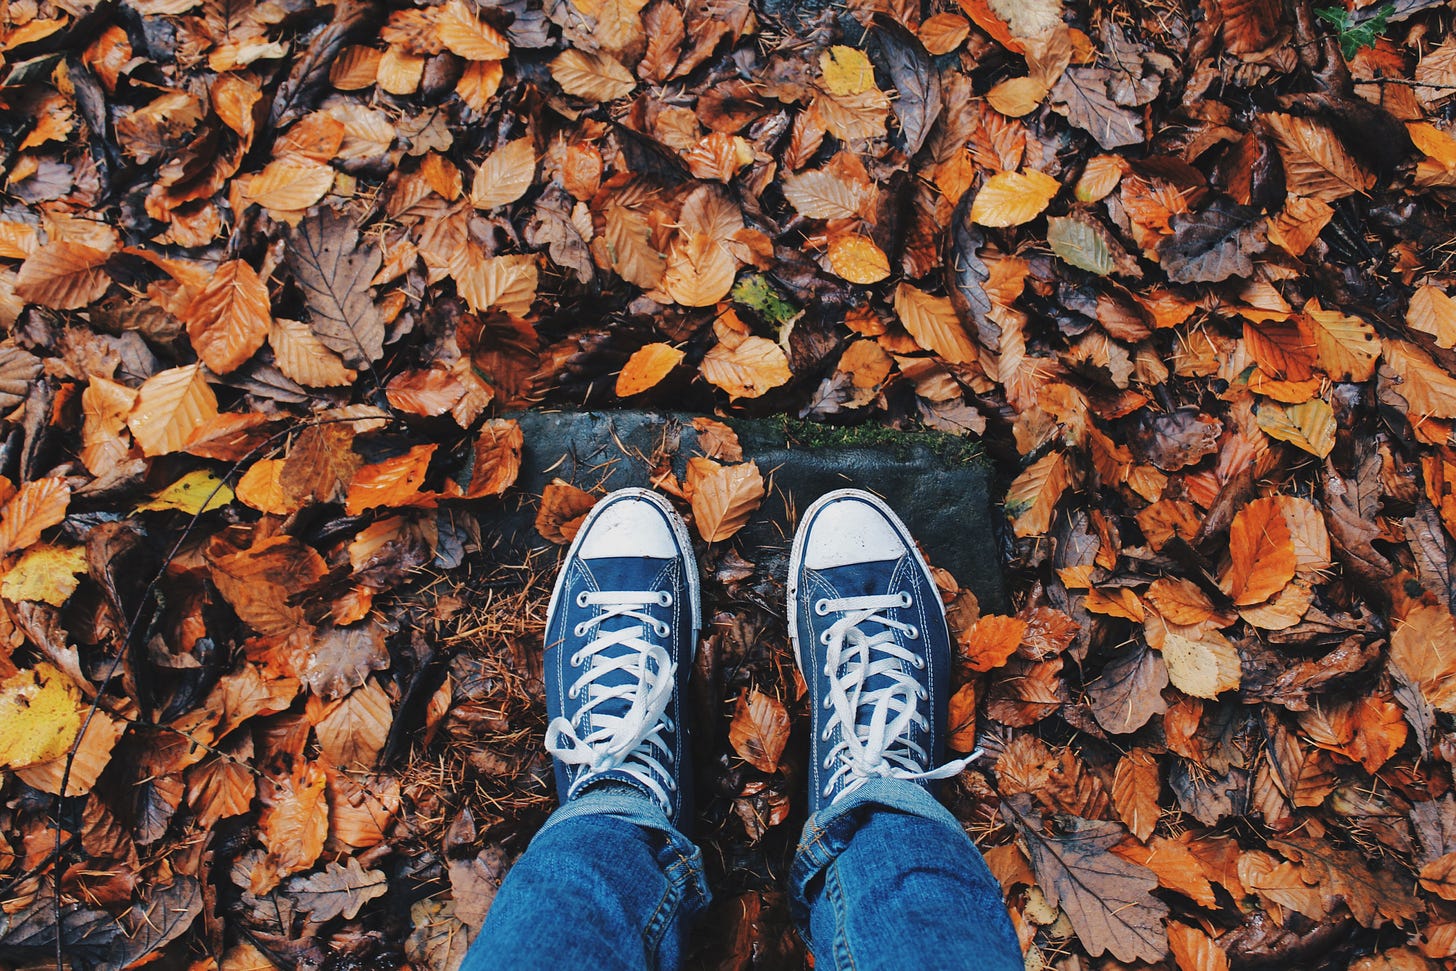 Looking down at black converse shoes and blue jeans surrounded by orange, brown autumn leaves